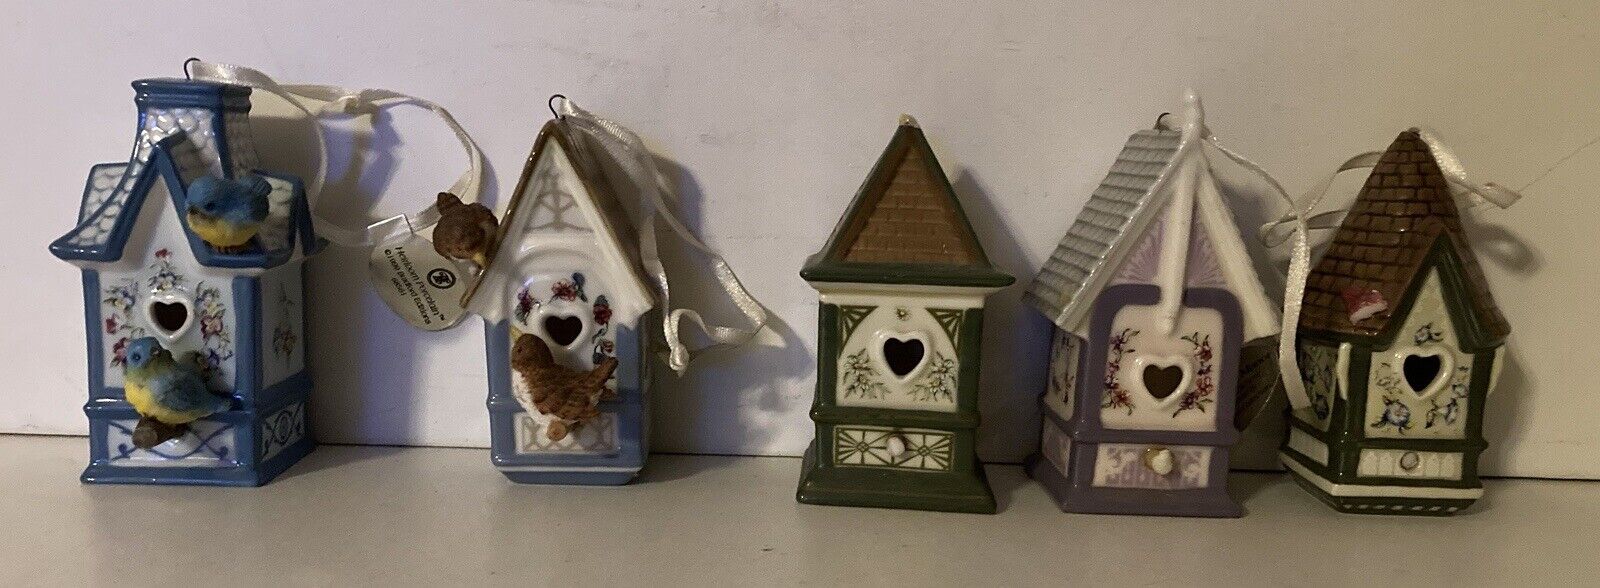 5 Home Is Where The Heart Is Birdhouse Ornaments 1999 Bradford Editions“Chipped”